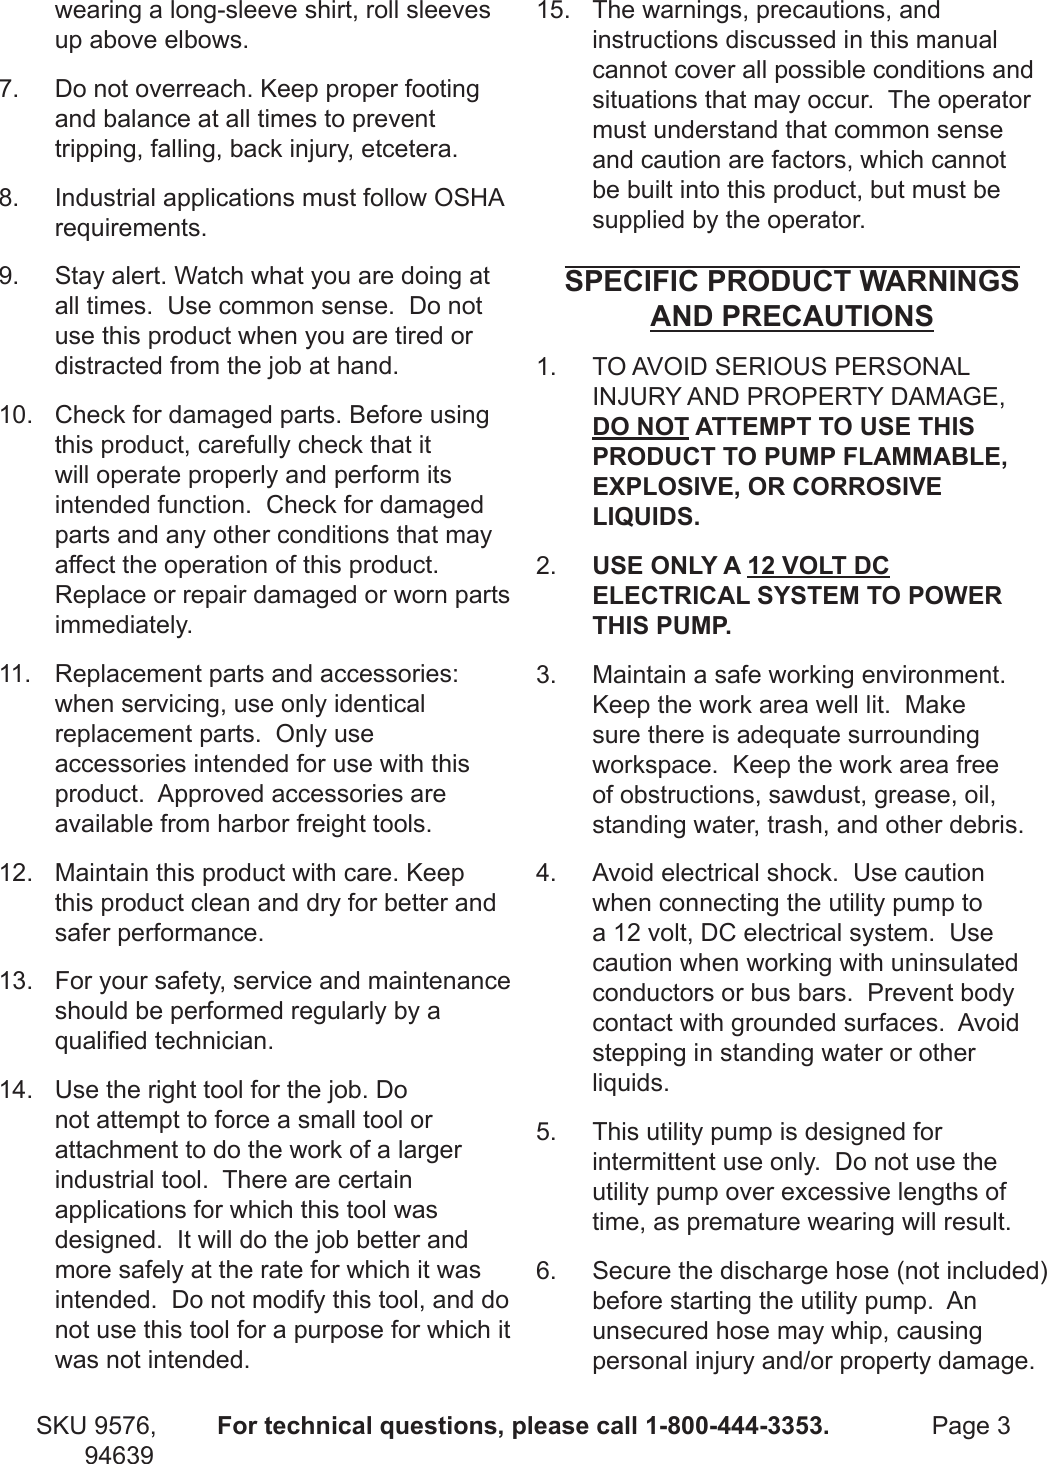 Page 3 of 8 - Harbor-Freight Harbor-Freight-12-Volt-Marine-Utility-Pump-Product-Manual-  Harbor-freight-12-volt-marine-utility-pump-product-manual